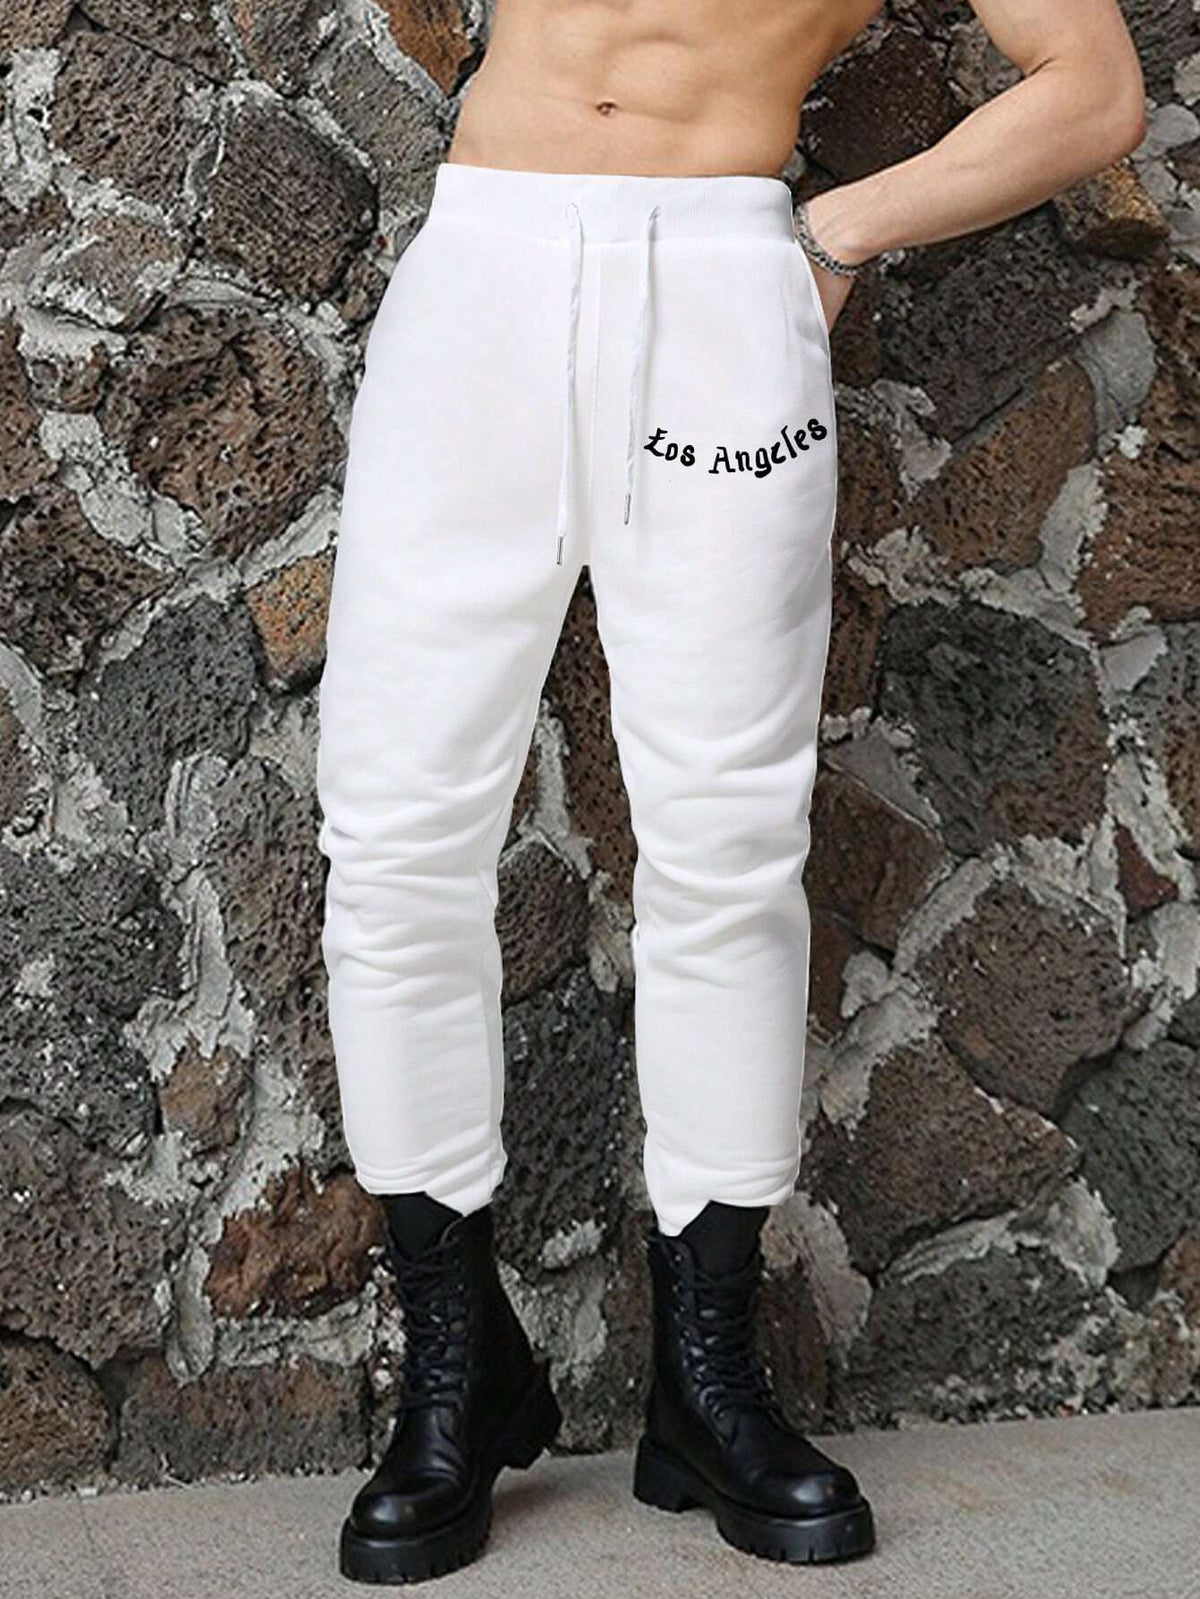 Letter Printed Pants With Drawstring